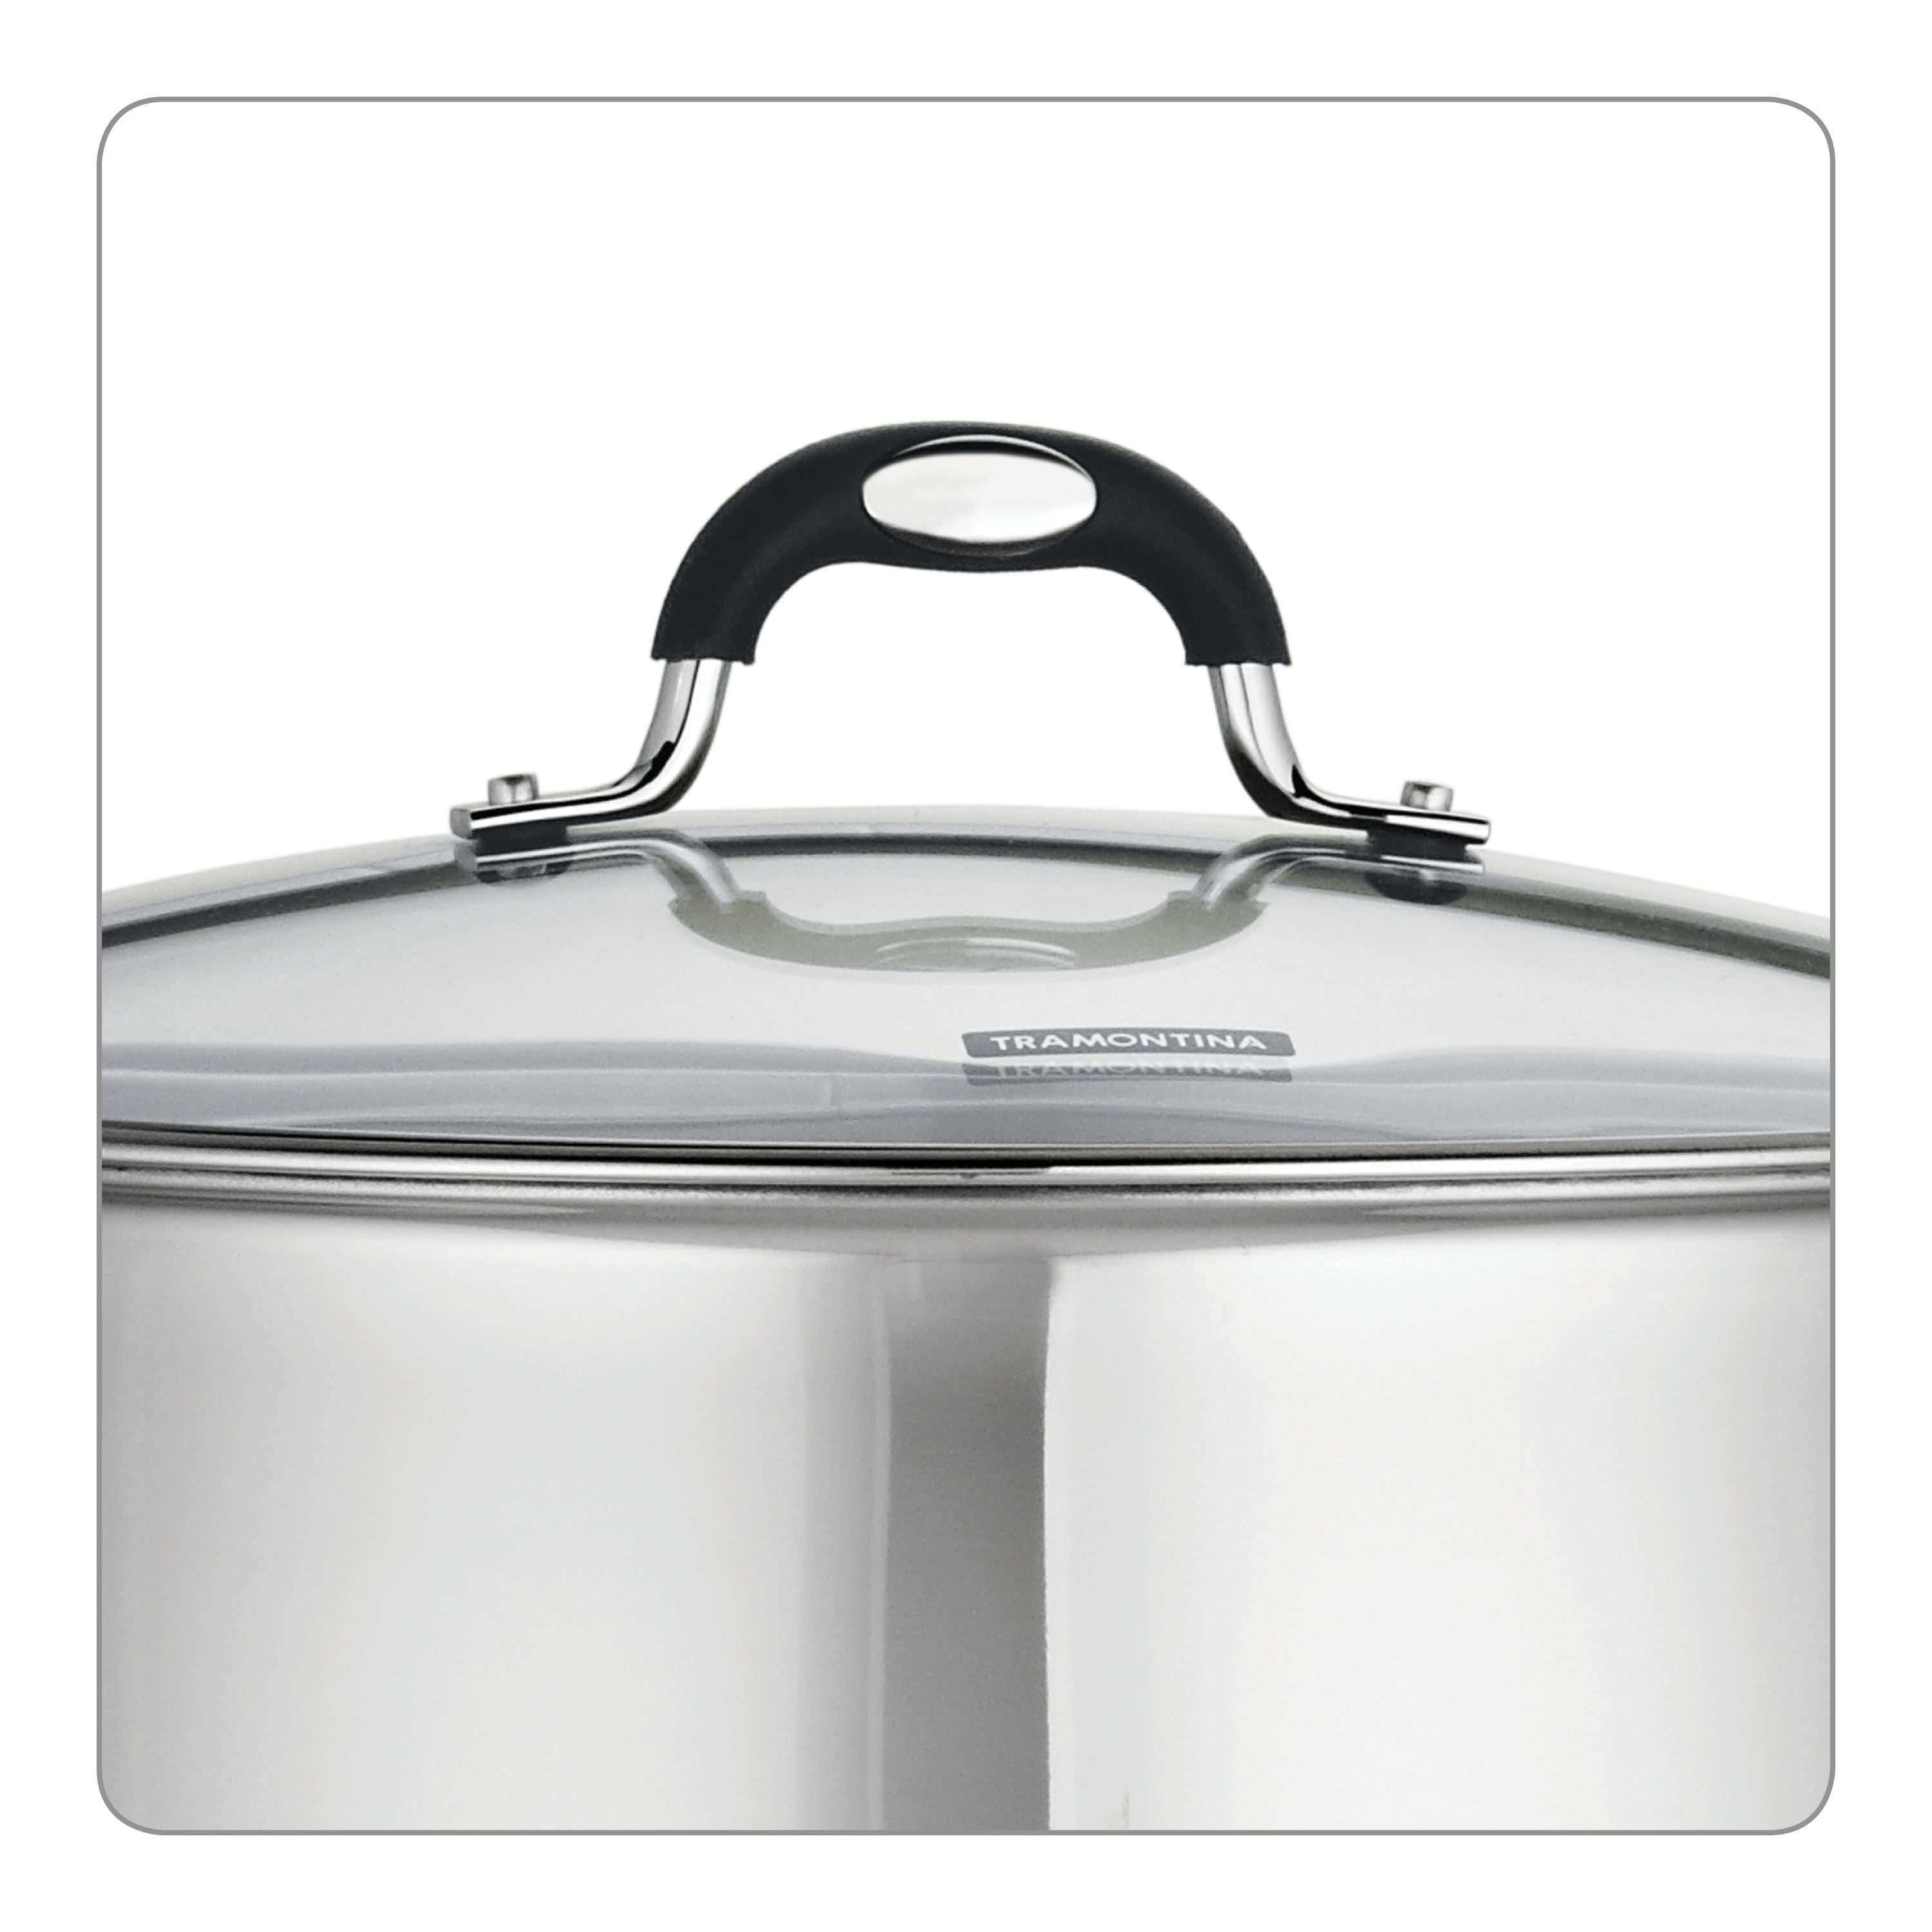 Stock Pot with Lid Tramontina 38 Quart for Sale in Ontario, CA - OfferUp